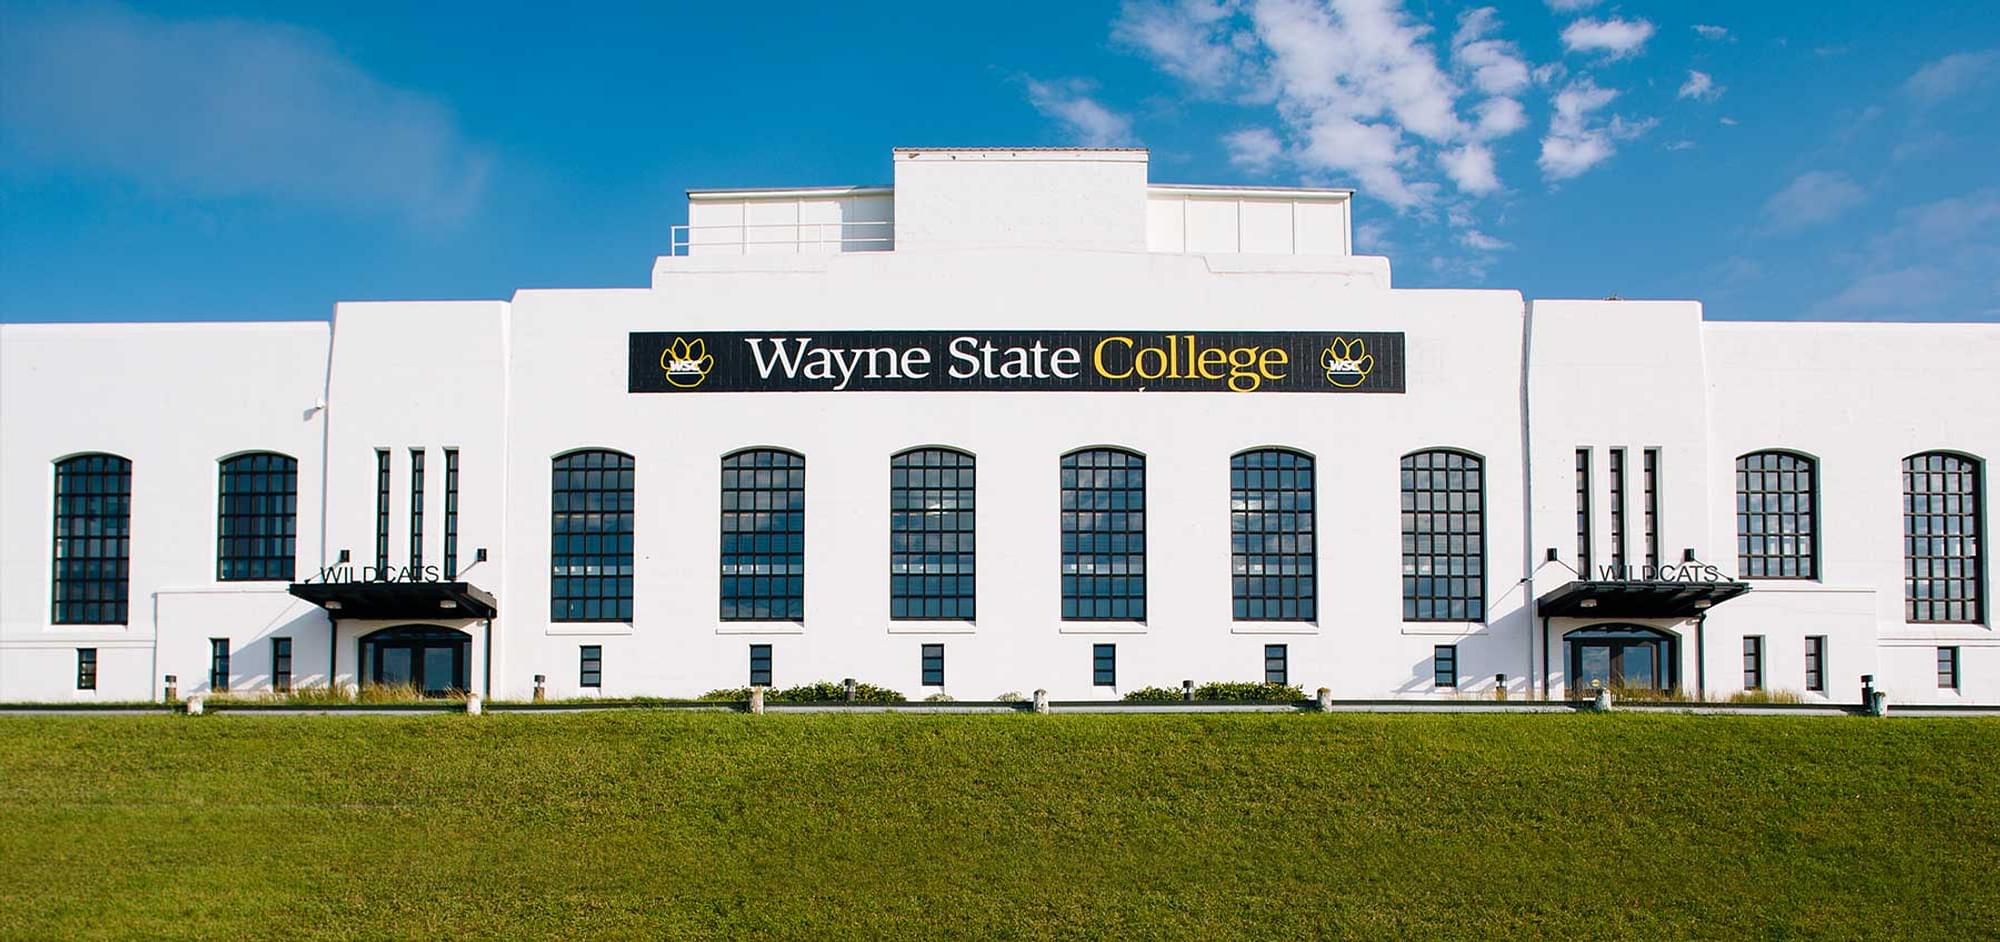 Wayne State College Wayne Courses Fees Ranking And Admission Criteria